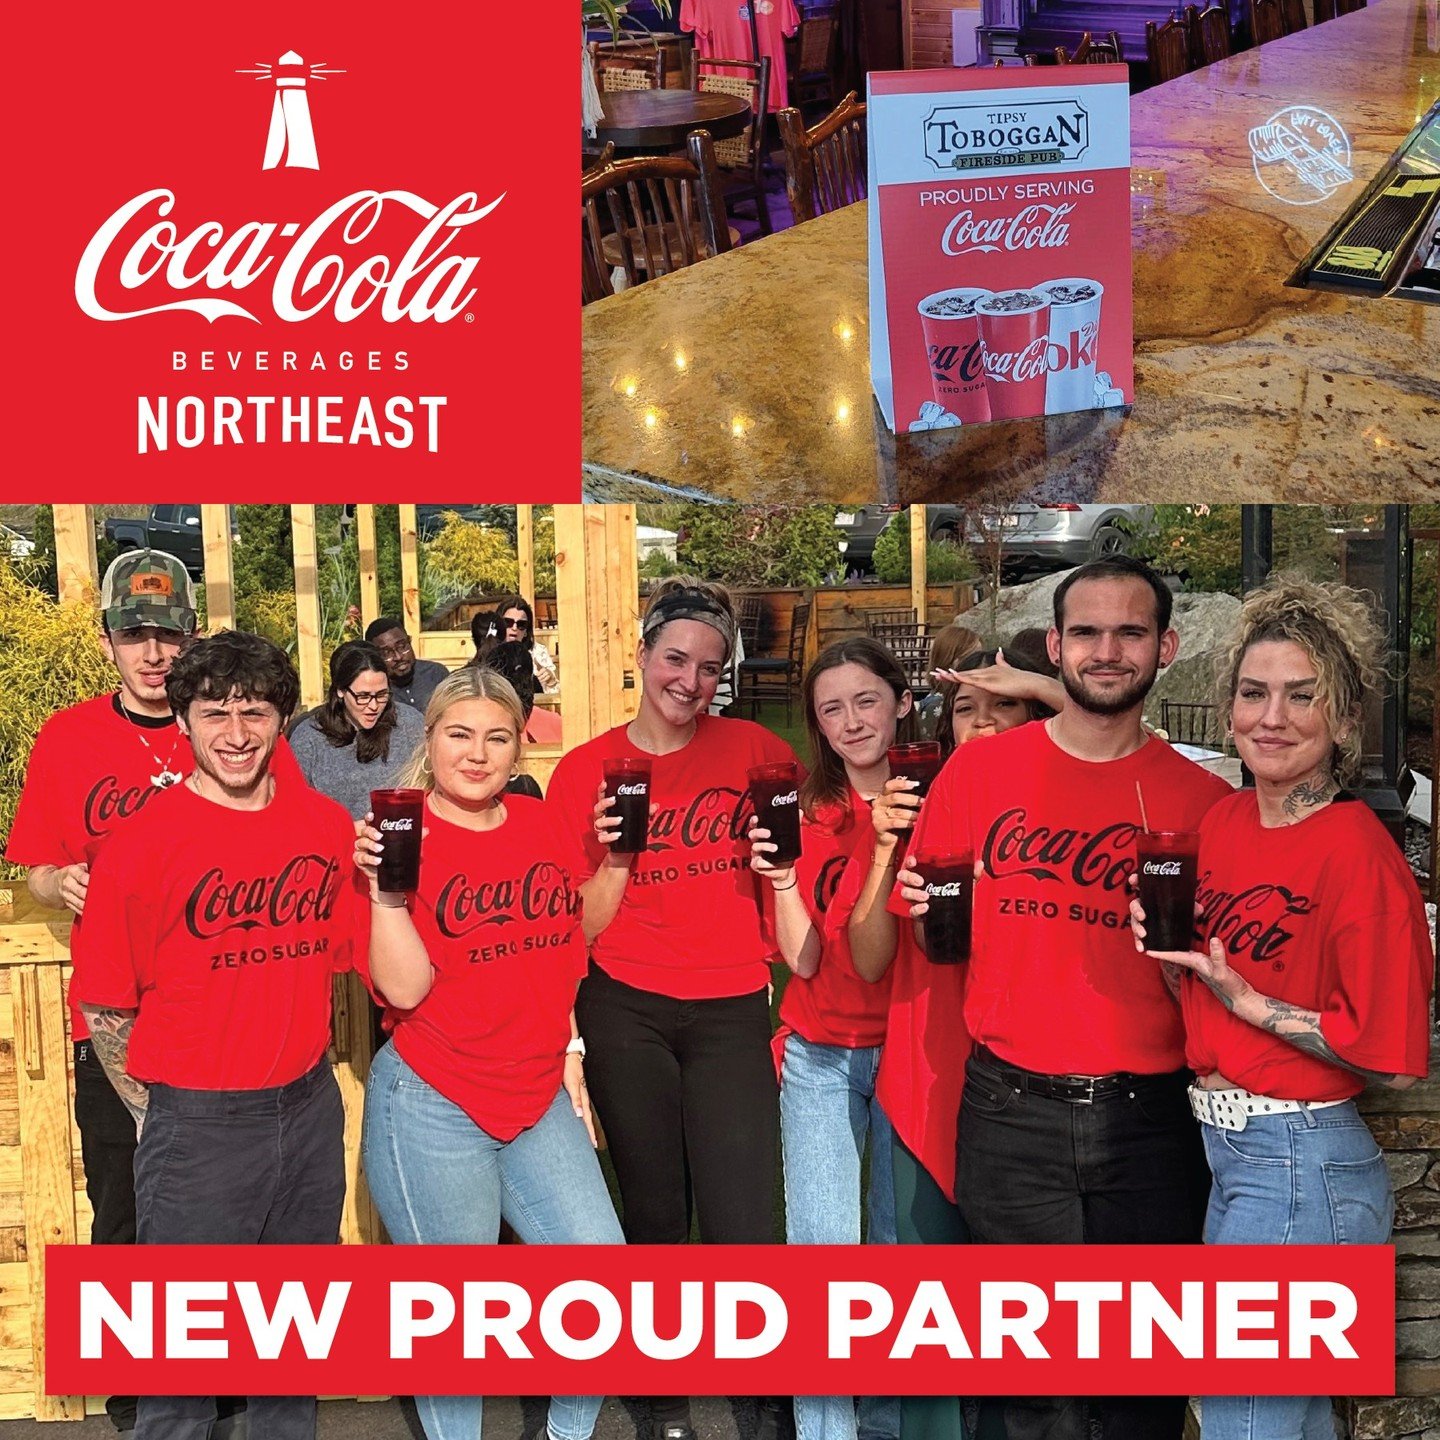 New Proud Partner!! We are excited to share that The Tipsy Toboggan in Fall River, MA is now serving delicious Coca-Cola products. Welcome to the Coke Northeast customer family!

The Tipsy Toboggan
75 Ferry Street, Fall River, MA
@thetipsytoboggan 

